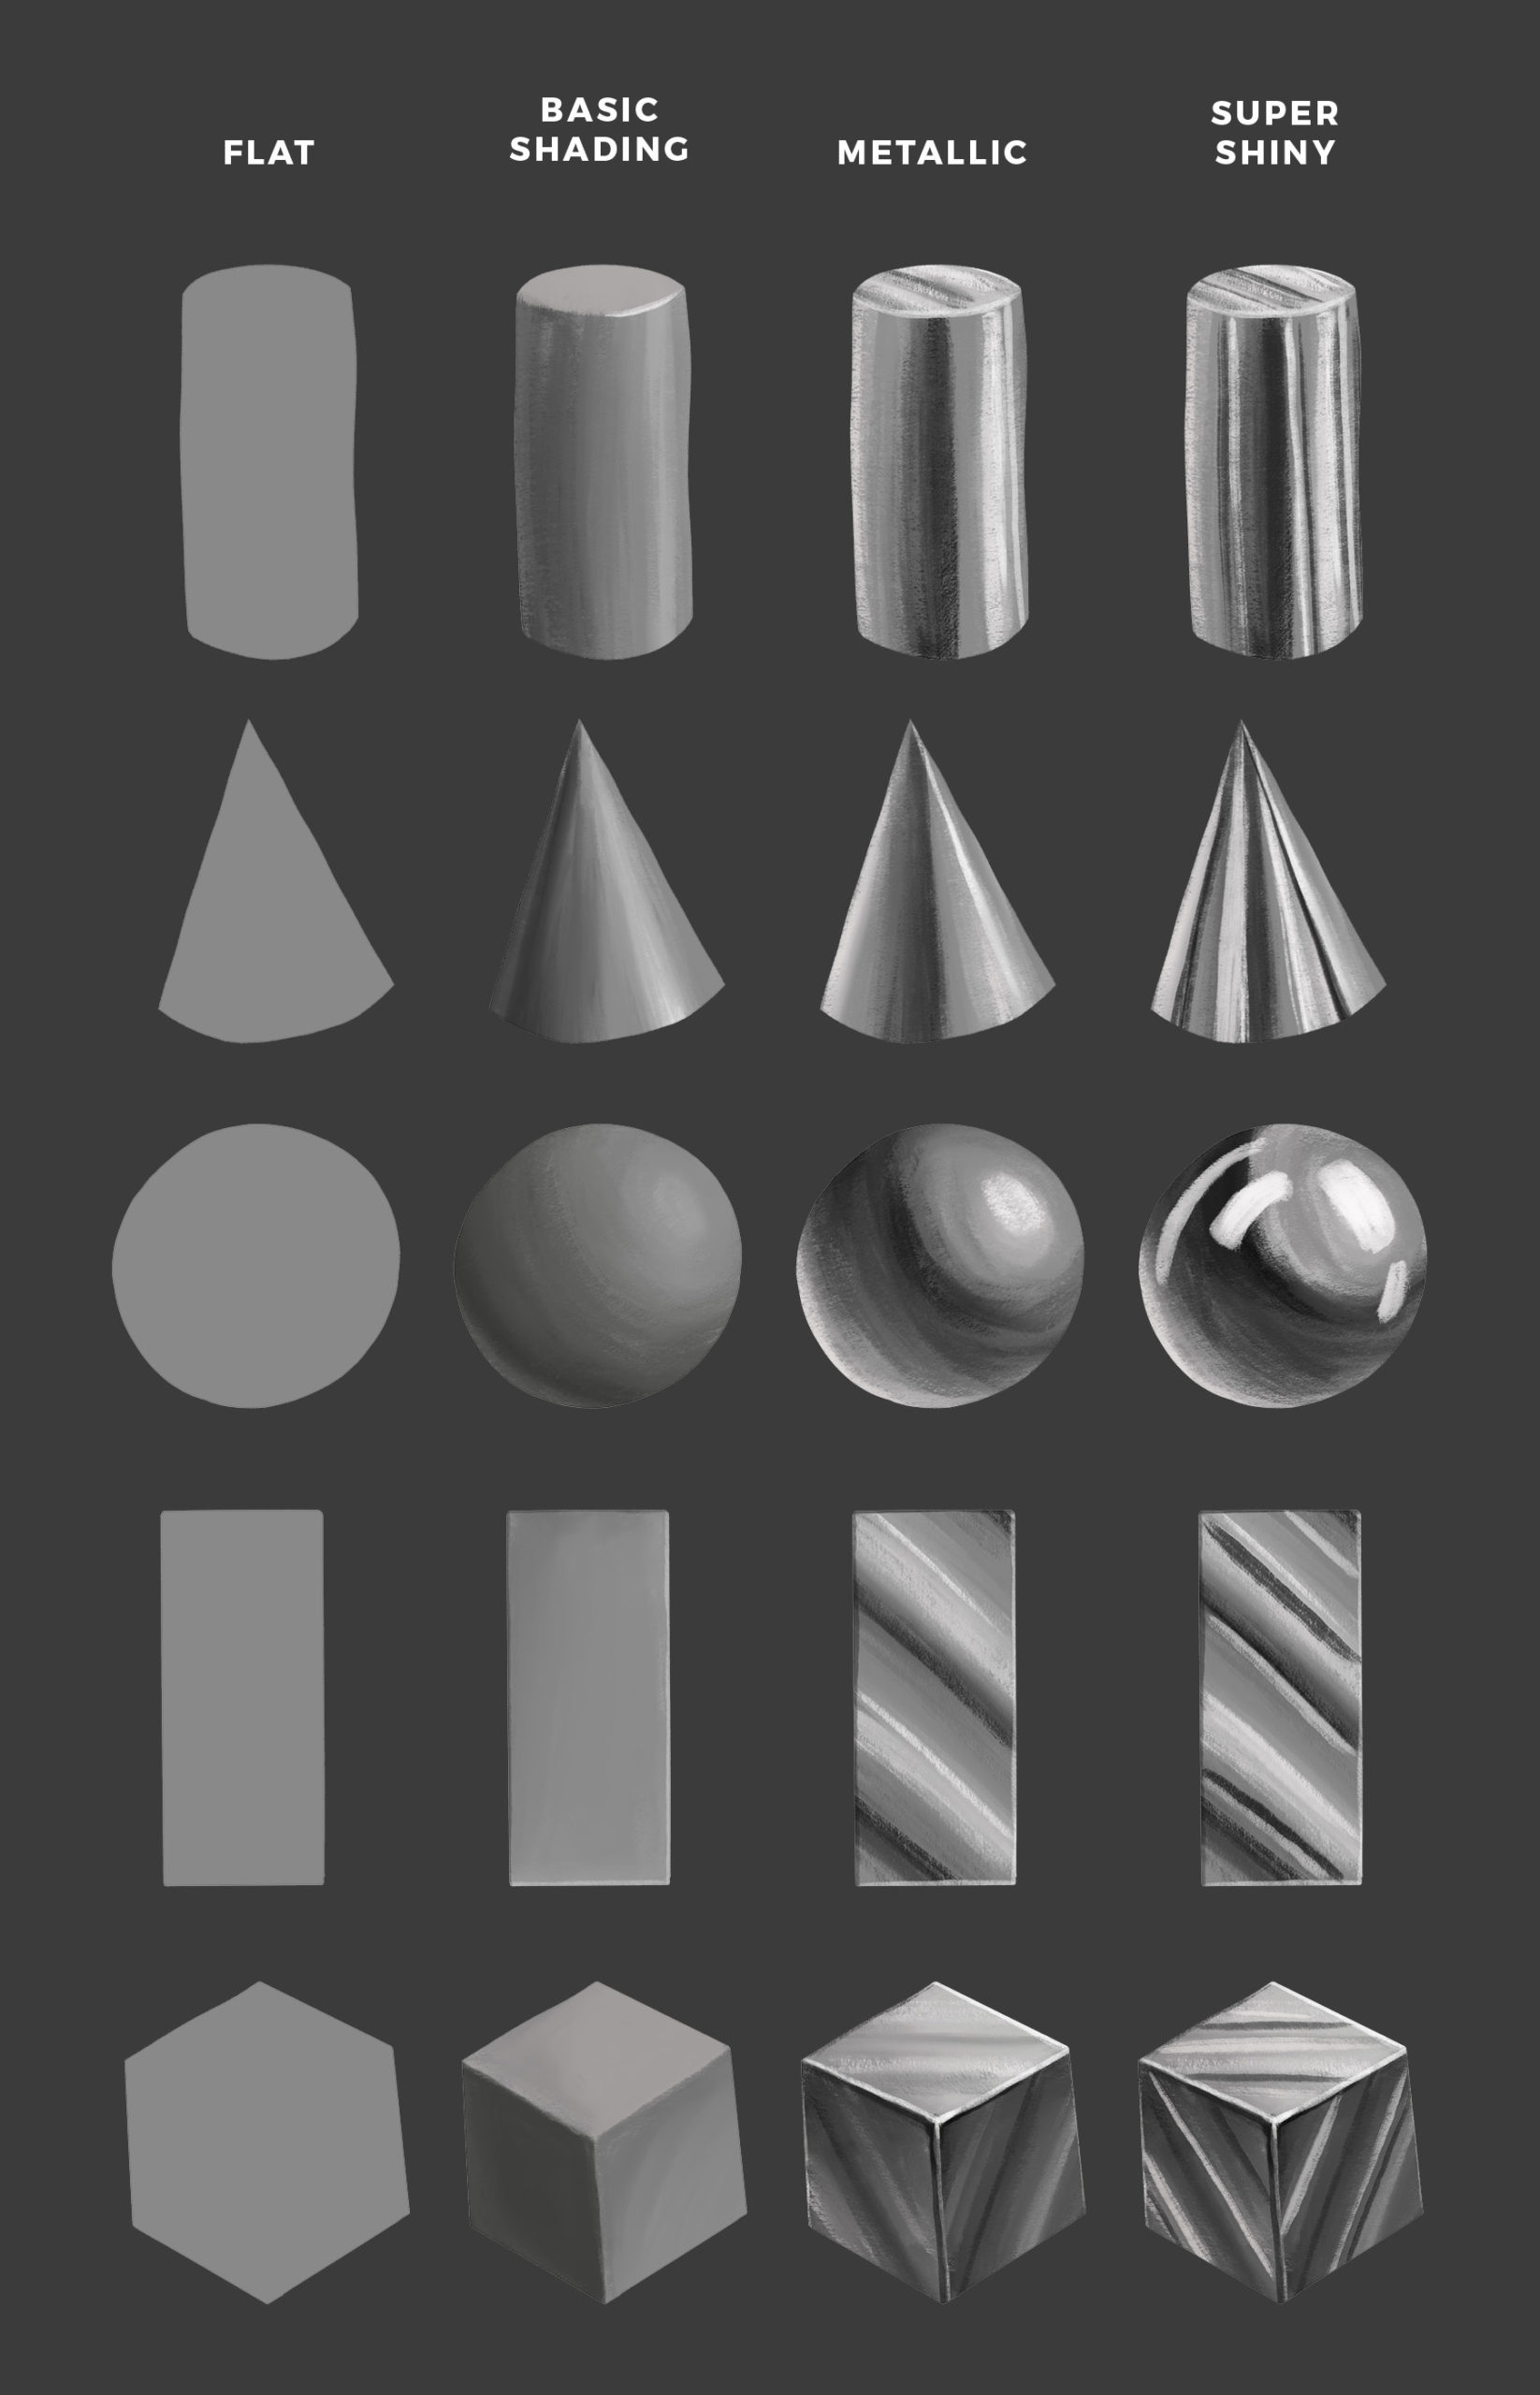 How to Shade Cones : Shading 3D Cones Drawing Tutorial